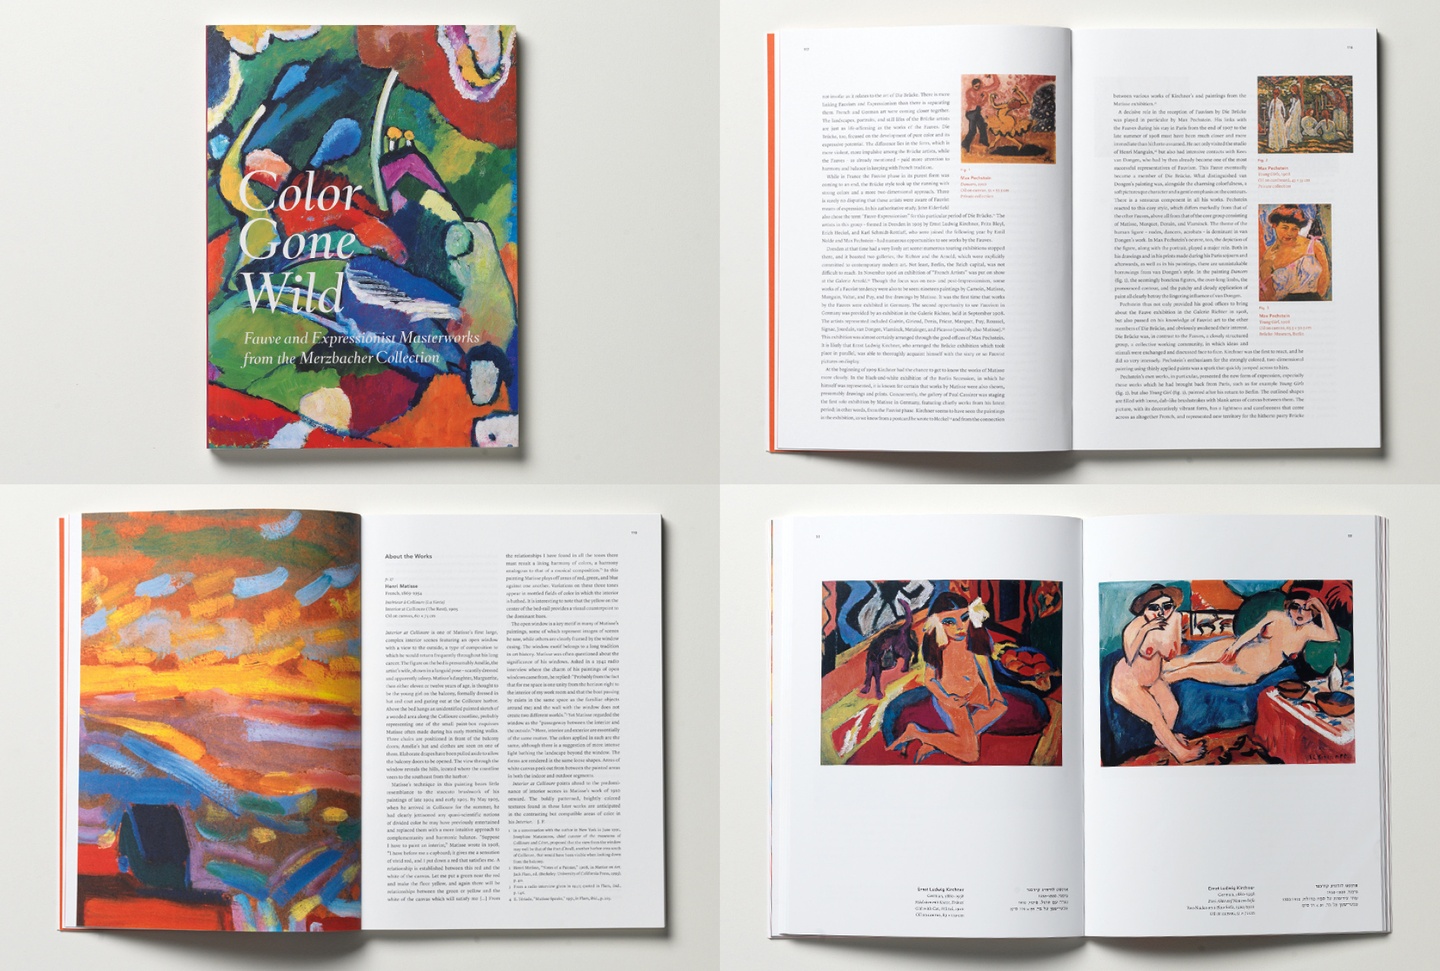 A book with a colorful cover and photographs of artworks within: the title reads "Color Gone Wild" with smaller text "Fauve and Expressionist Masterworks from the Merzbacher Collection", the inner cover a bright orange-red hue.